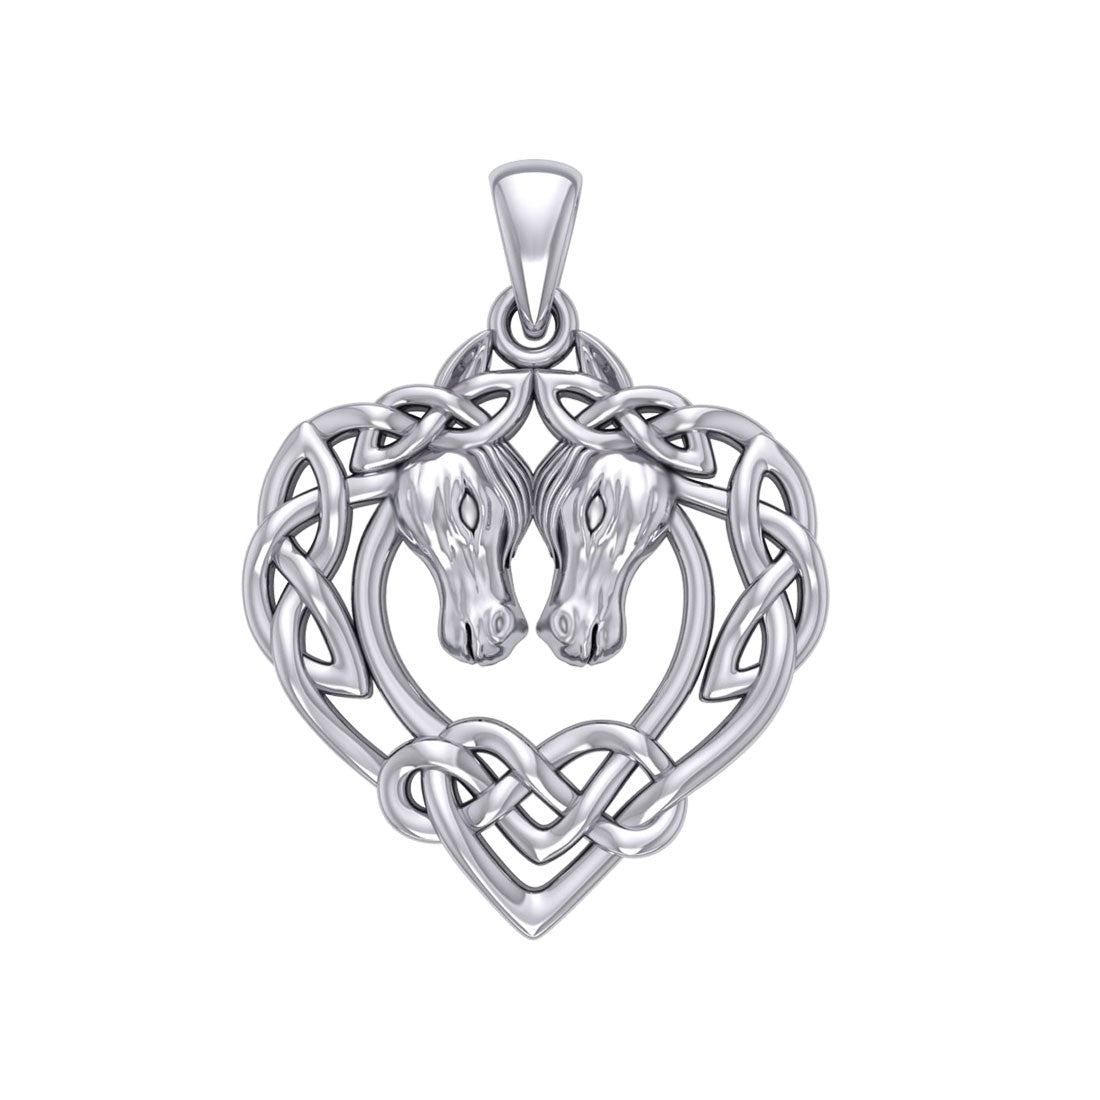 Double Horses in The Celtic Heart Silver Pendant TPD6027